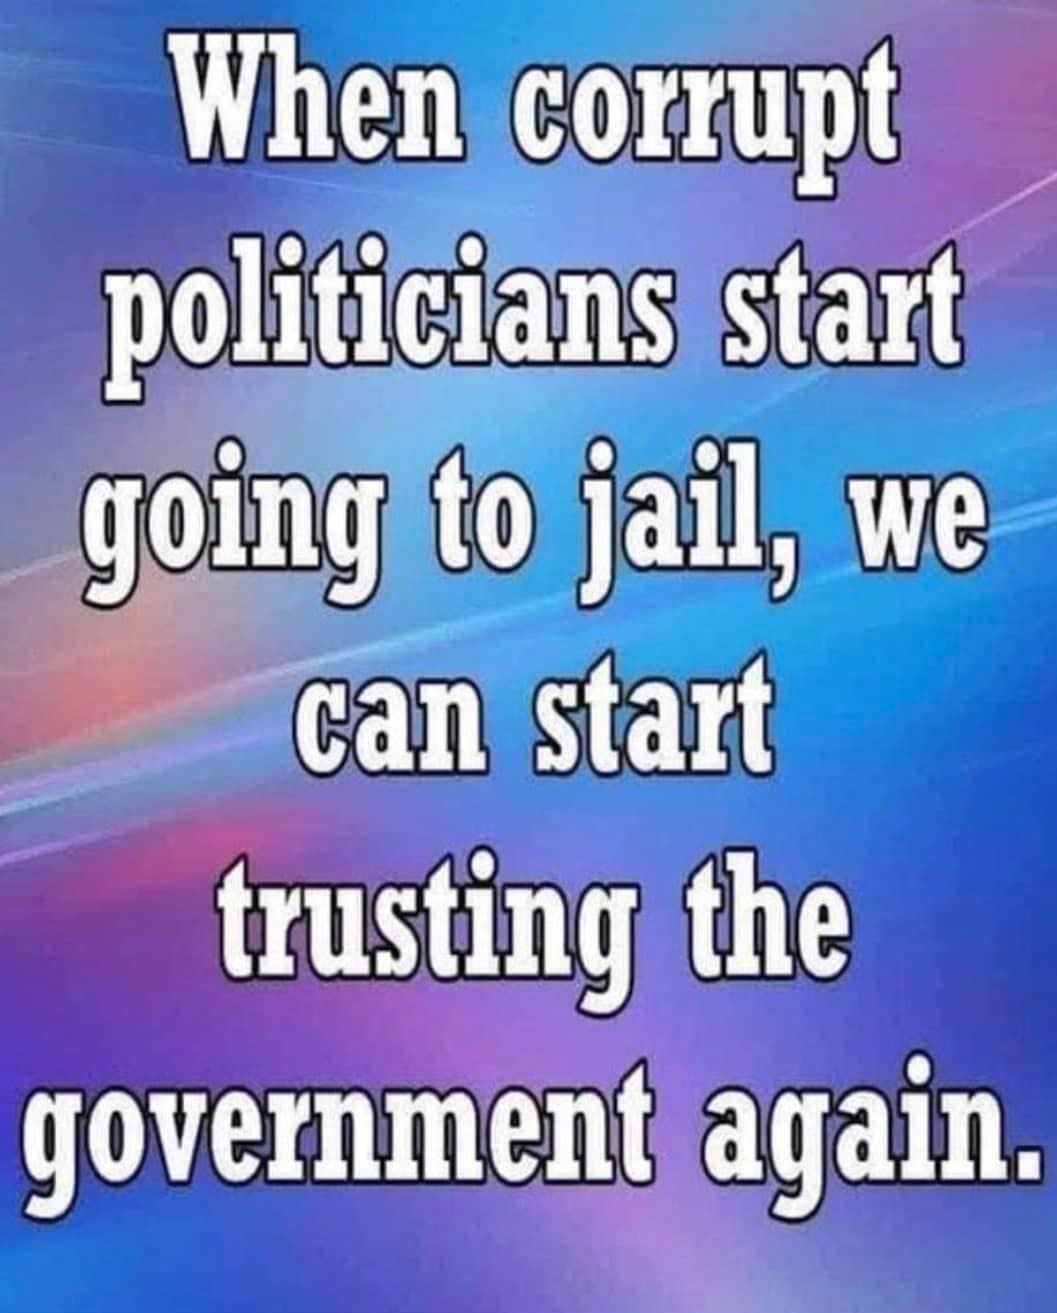 When corrupt politicians start going to jail, we can start trusting the government again.